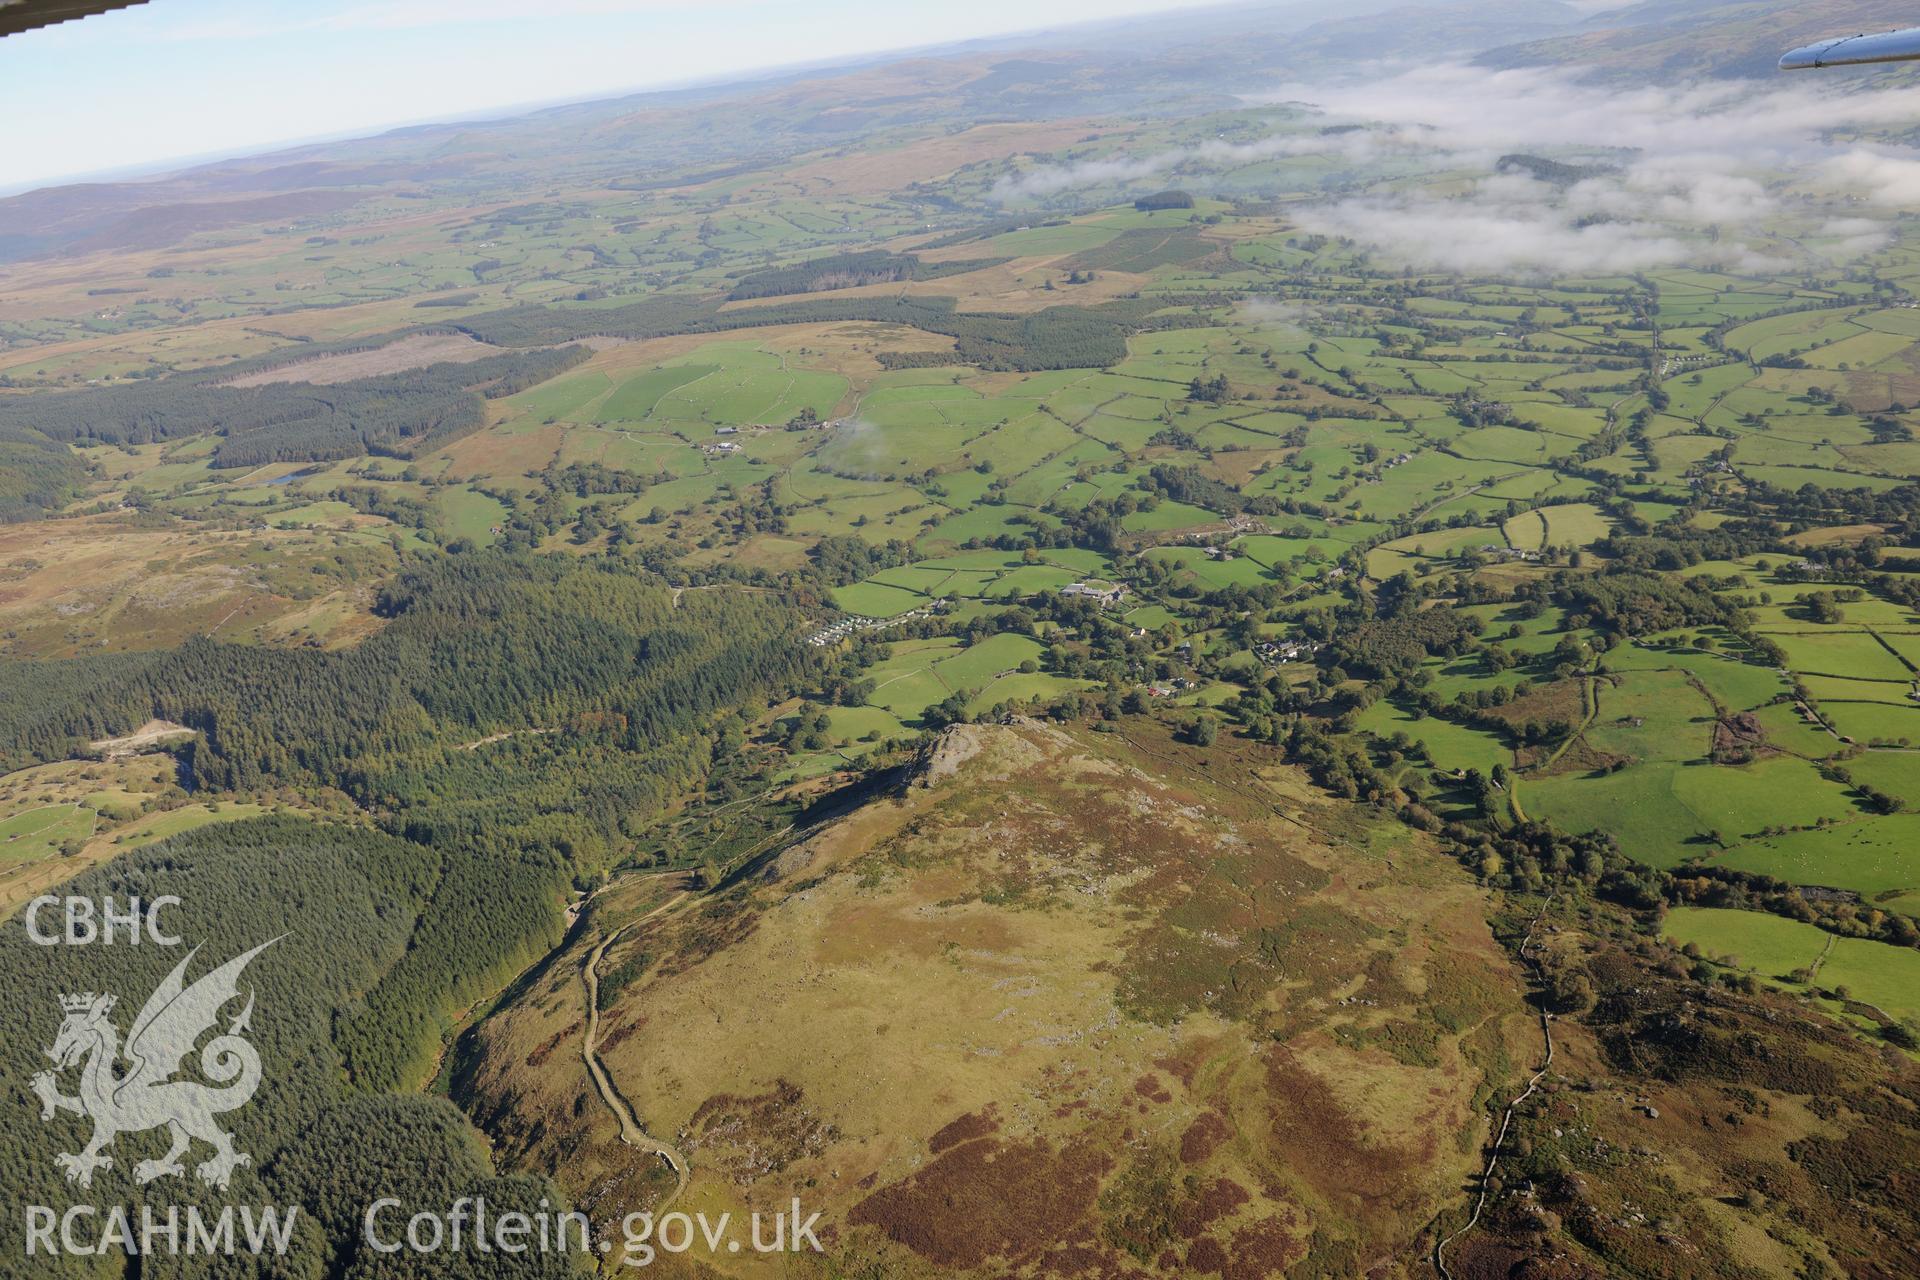 Castell Carndochan's crag and Coed Bryn Bras, overlooking the Lliw Valley, near Llanuwchlyn. Oblique aerial photograph taken during the Royal Commission's programme of archaeological aerial reconnaissance by Toby Driver on 2nd October 2015.